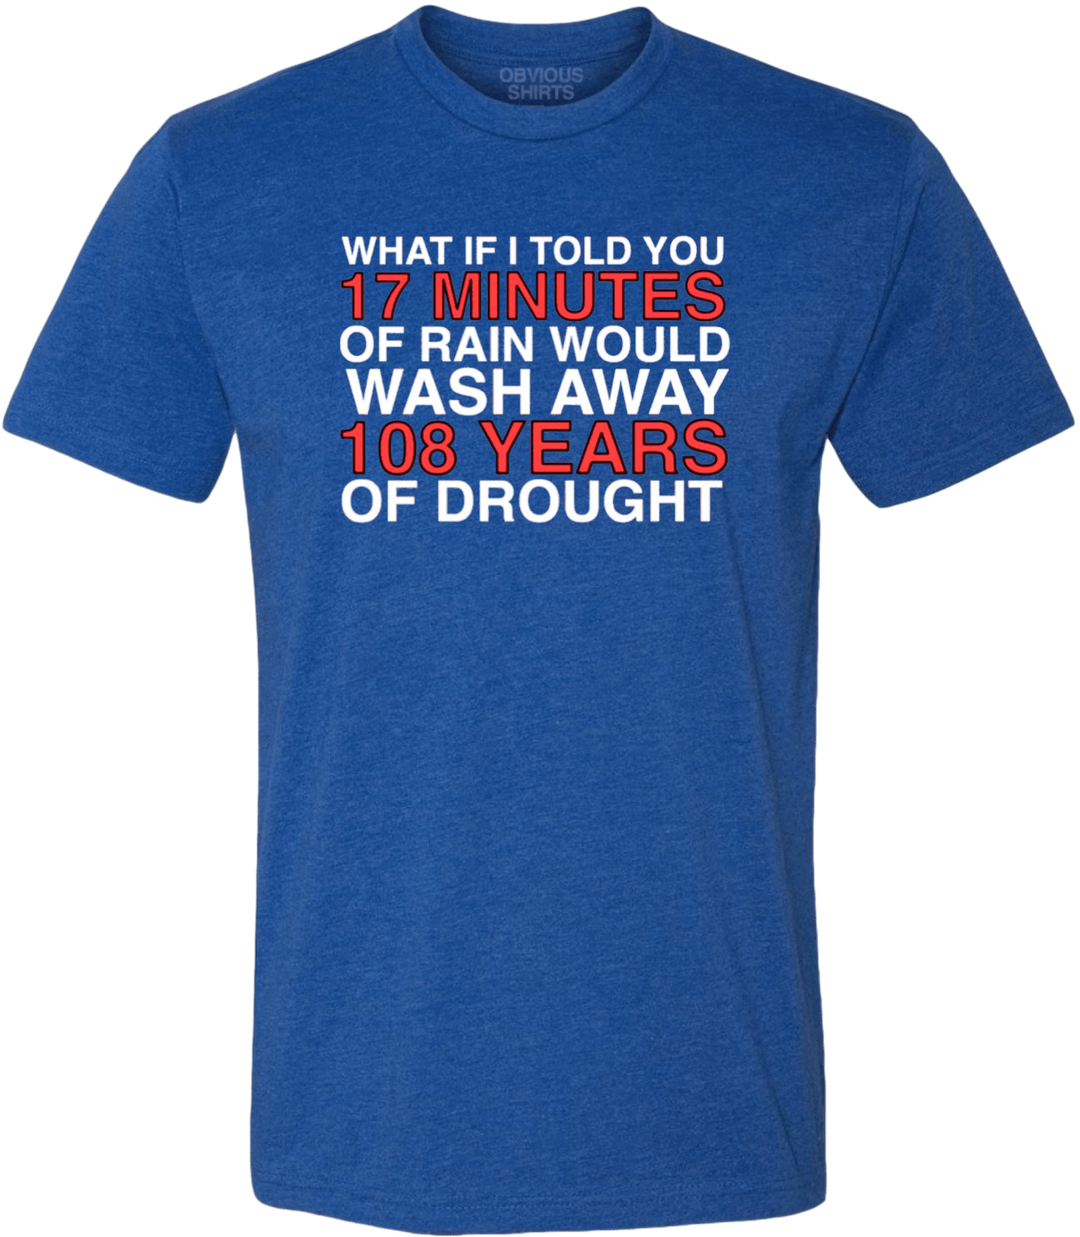 WHAT IF I TOLD YOU... - OBVIOUS SHIRTS.